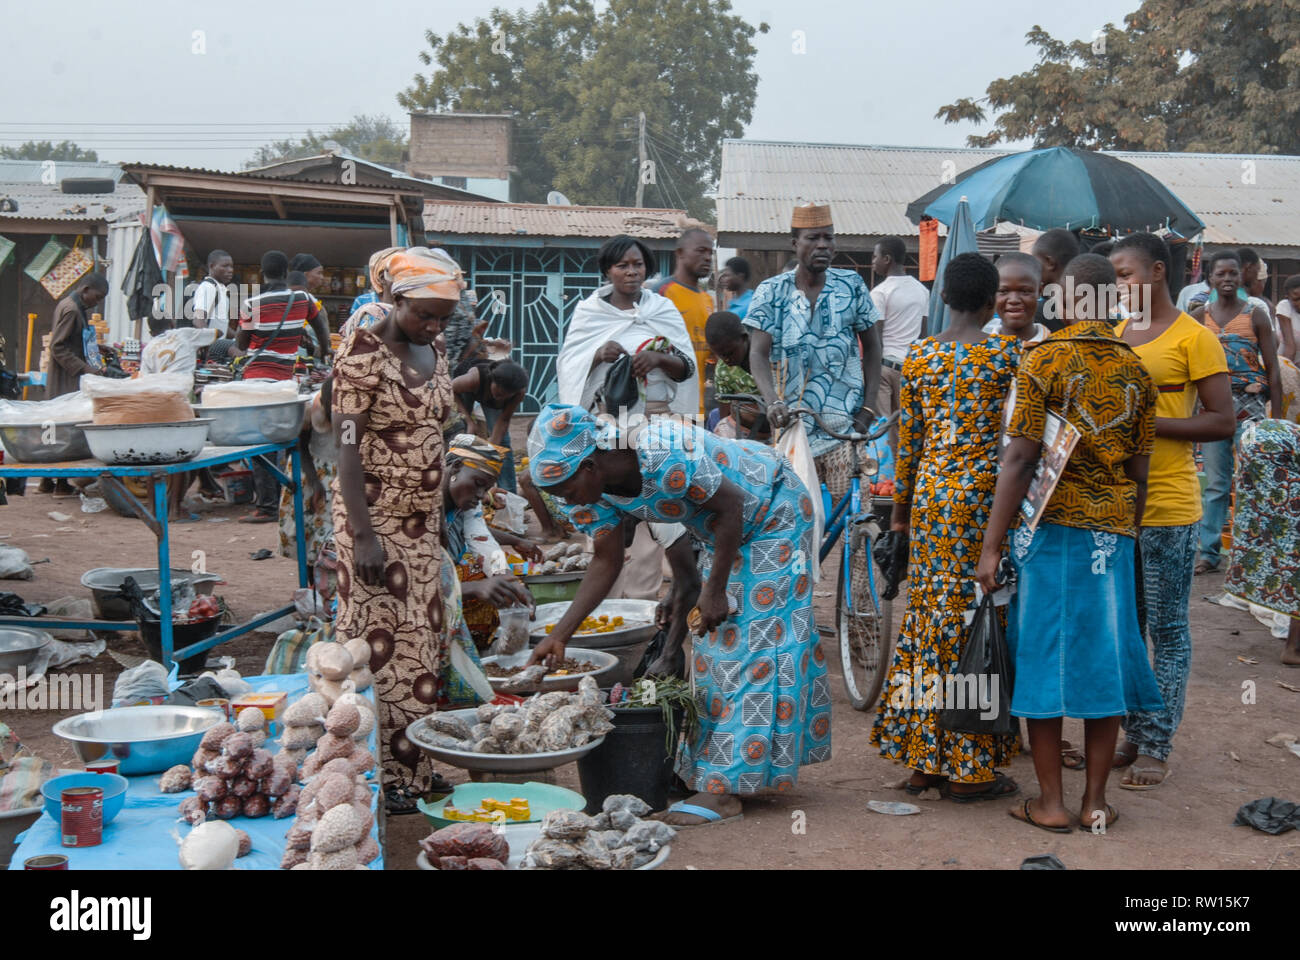 A nice colorful photo of local Ghanaian people wearing traditional clothes visiting the fresh market and socializing. Stock Photo